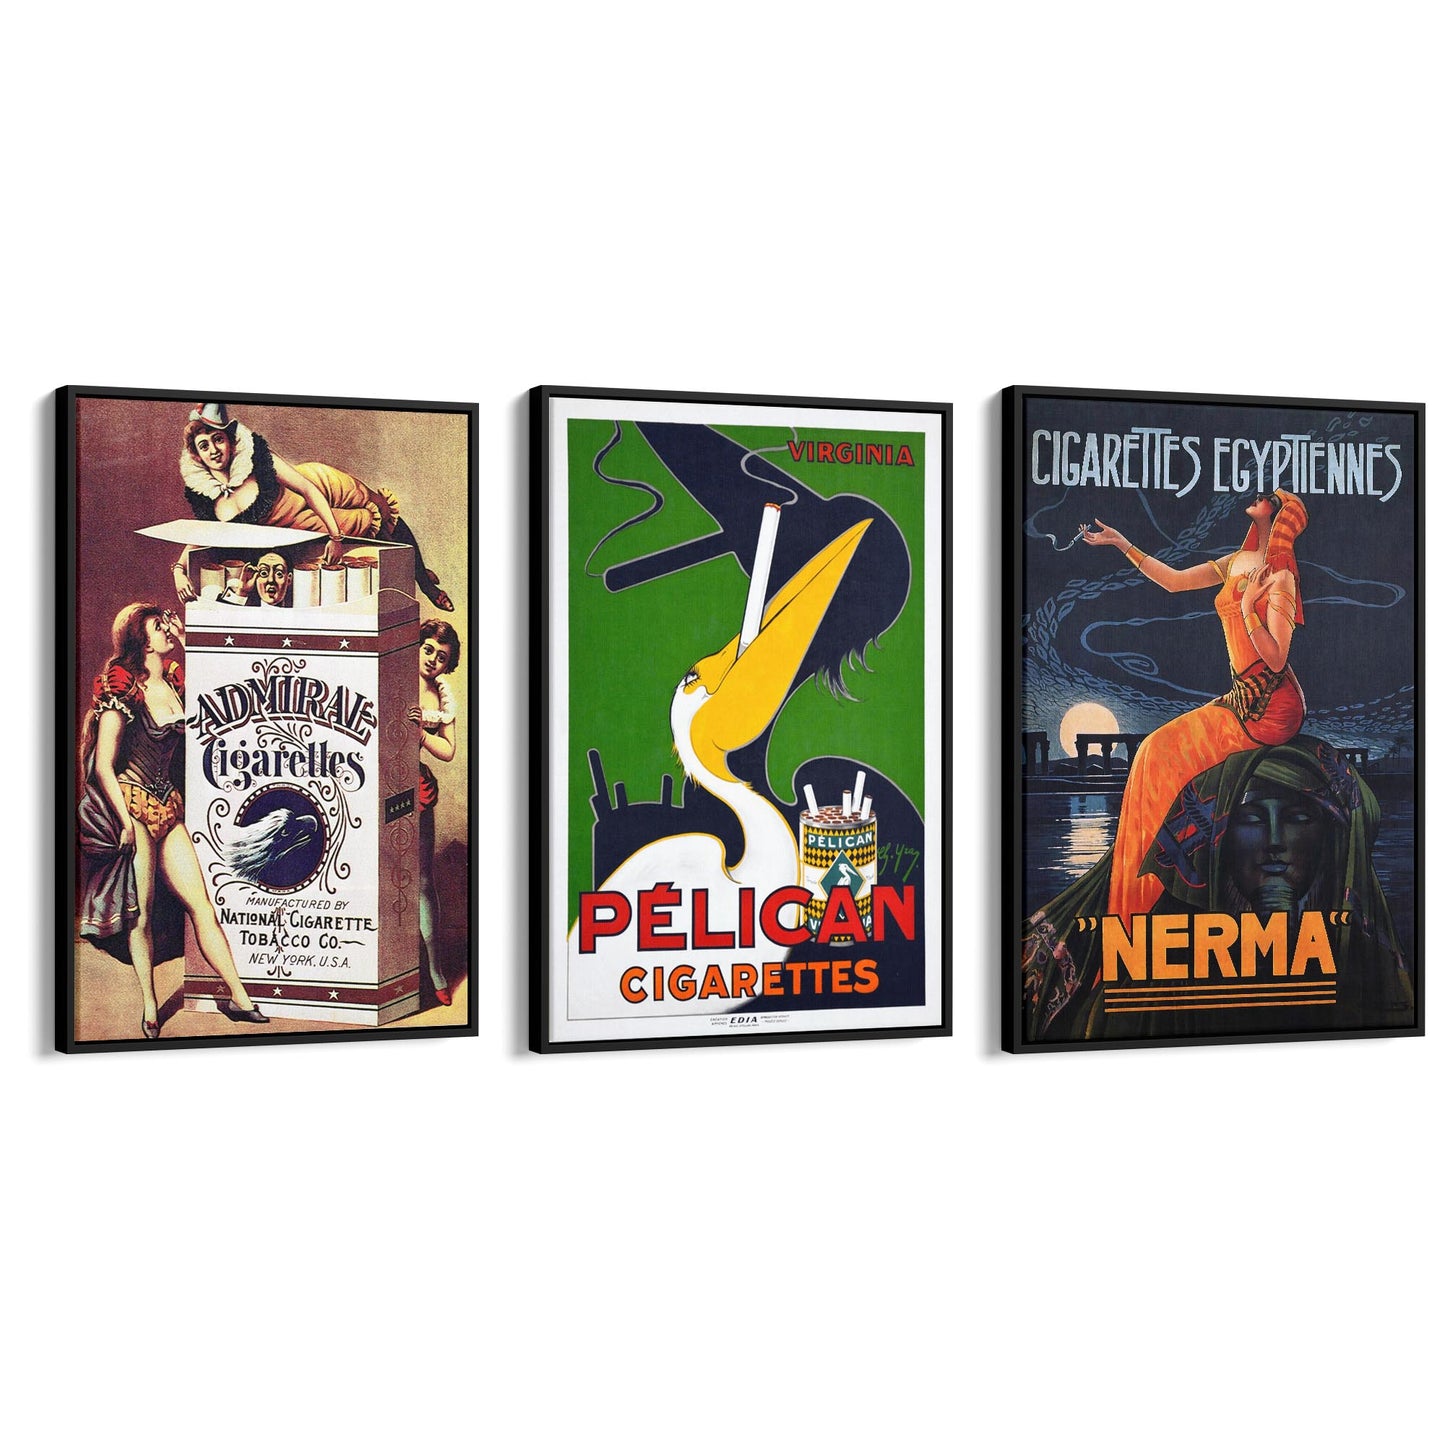 Set of Vintage Cigarette Adverts Wall Art - The Affordable Art Company